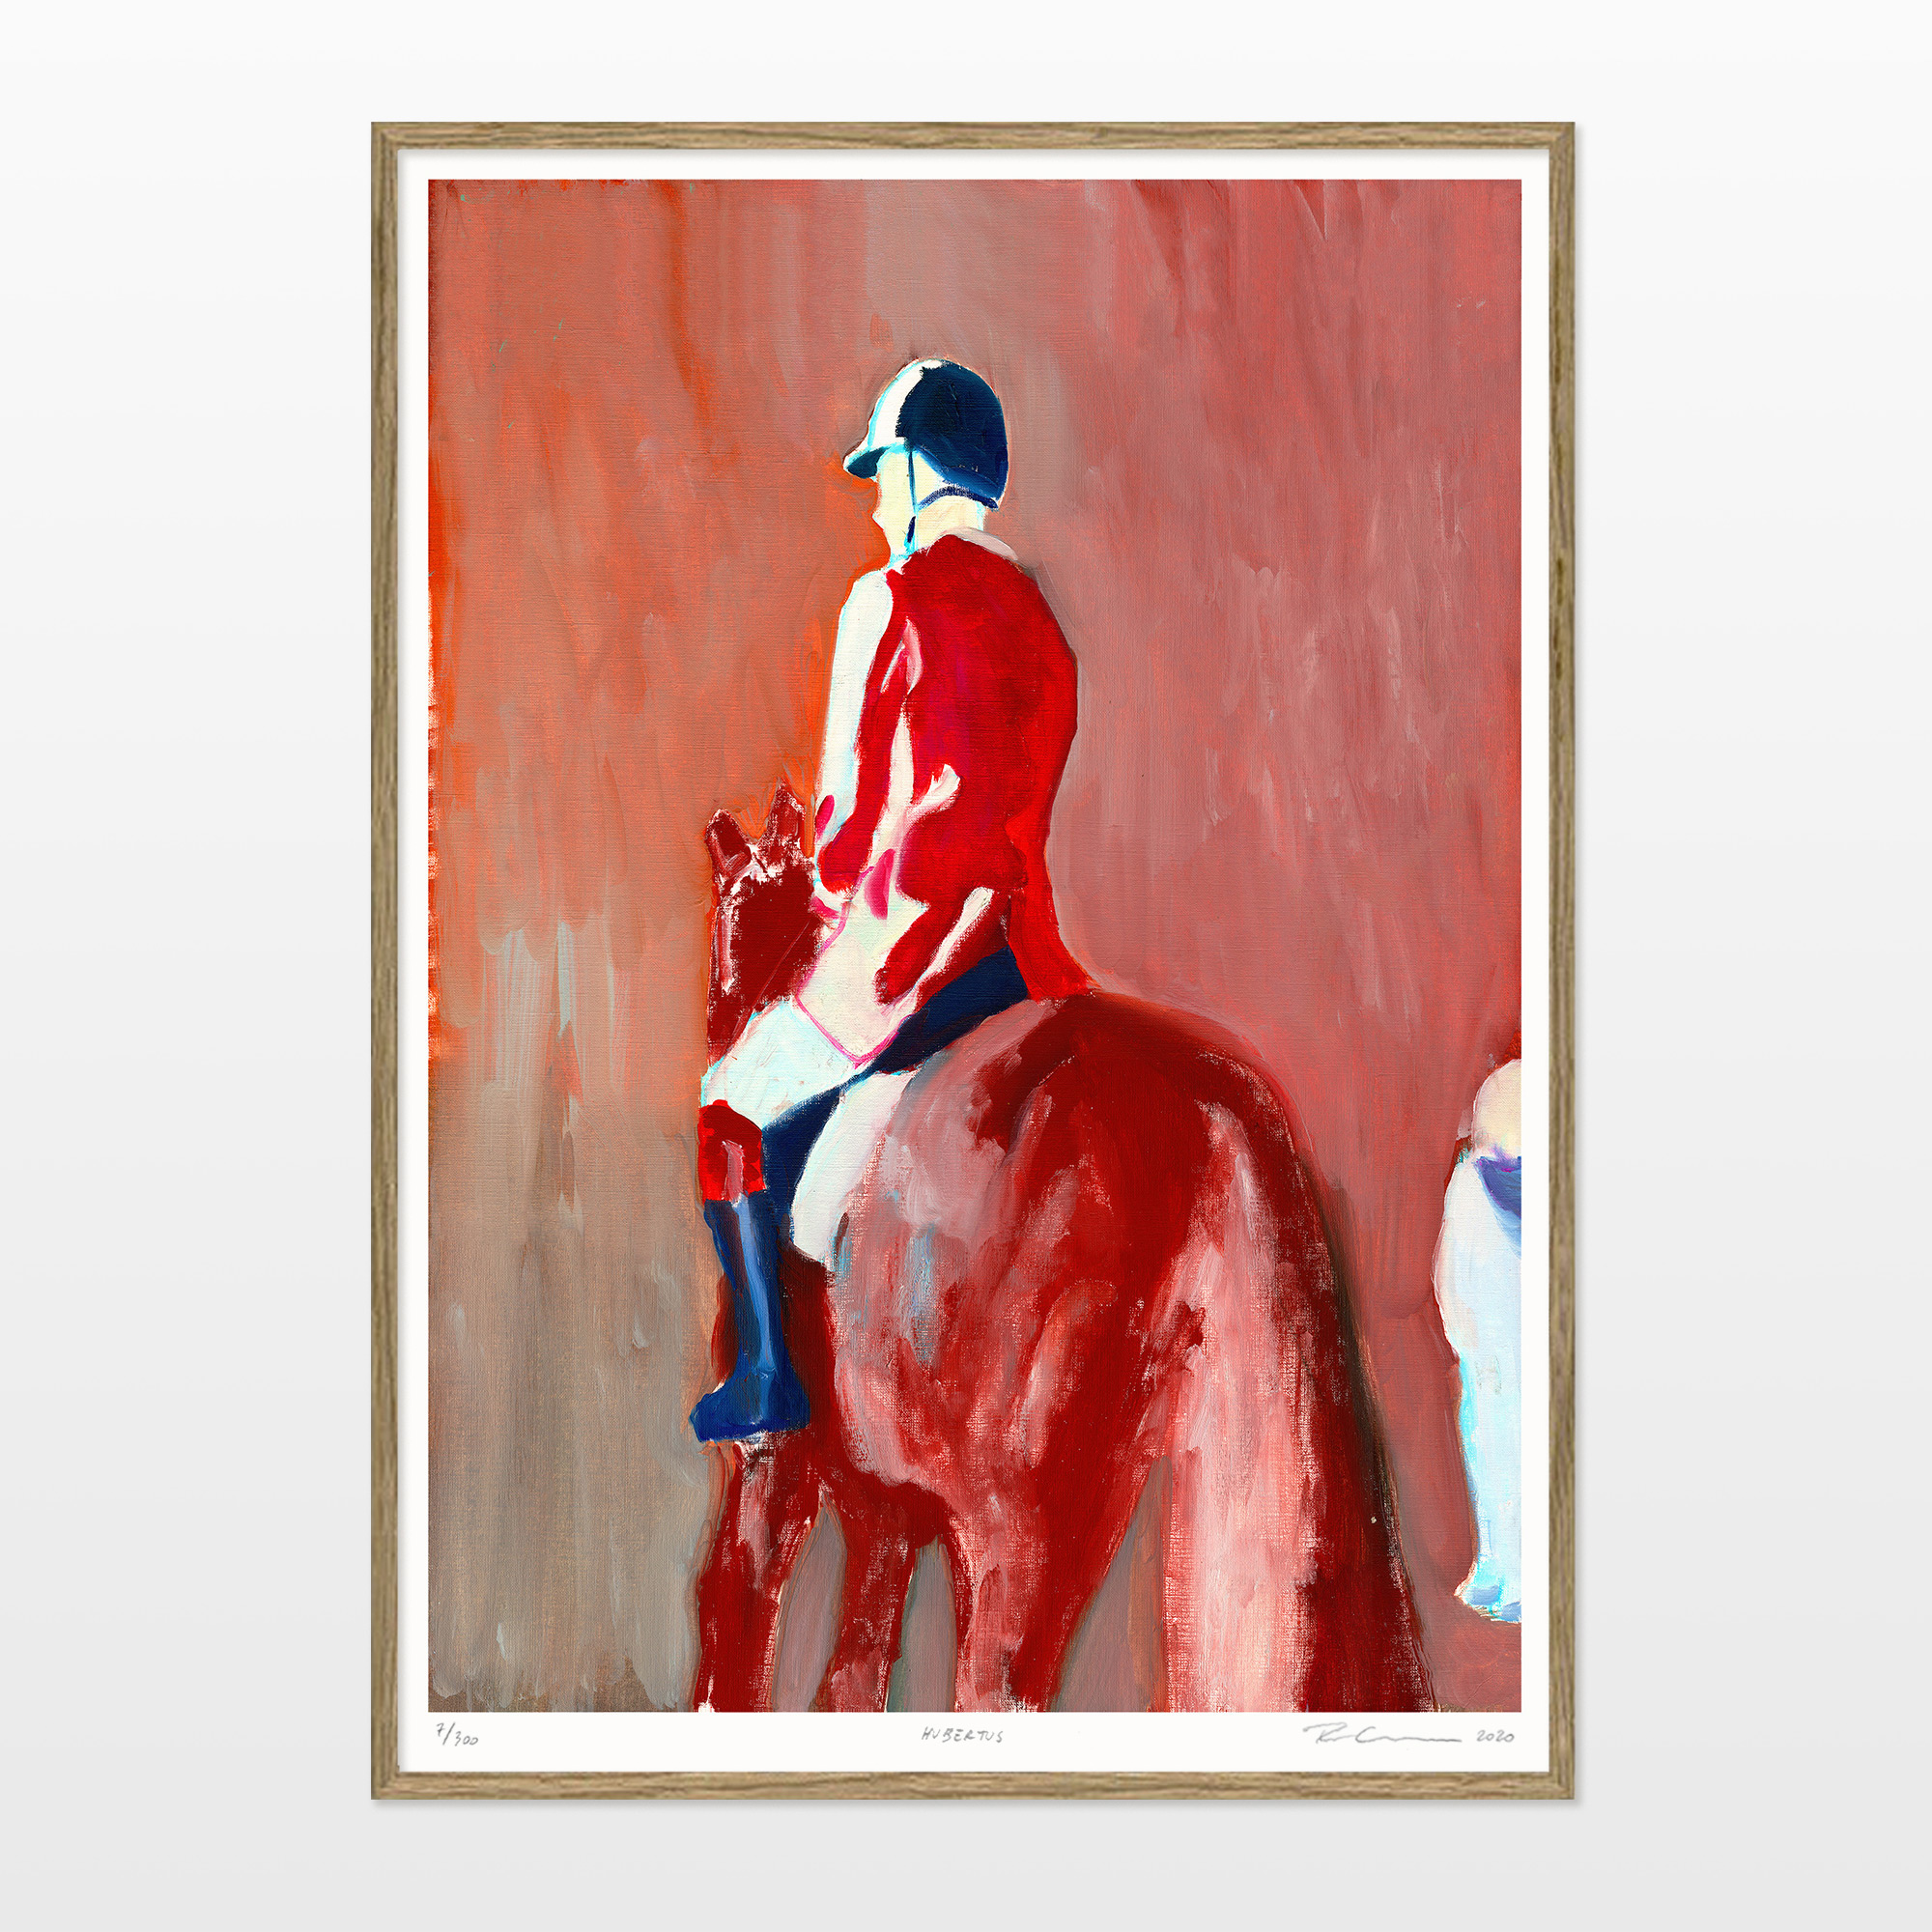 posters-prints, giclee-print, aesthetic, colorful, figurative, illustrative, landscape, animals, movement, nature, people, transportation, brown, red, ink, paper, beautiful, contemporary-art, decorative, design, forest, horses, interior, interior-design, modern, modern-art, naturalism, posters, prints, Buy original high quality art. Paintings, drawings, limited edition prints & posters by talented artists.